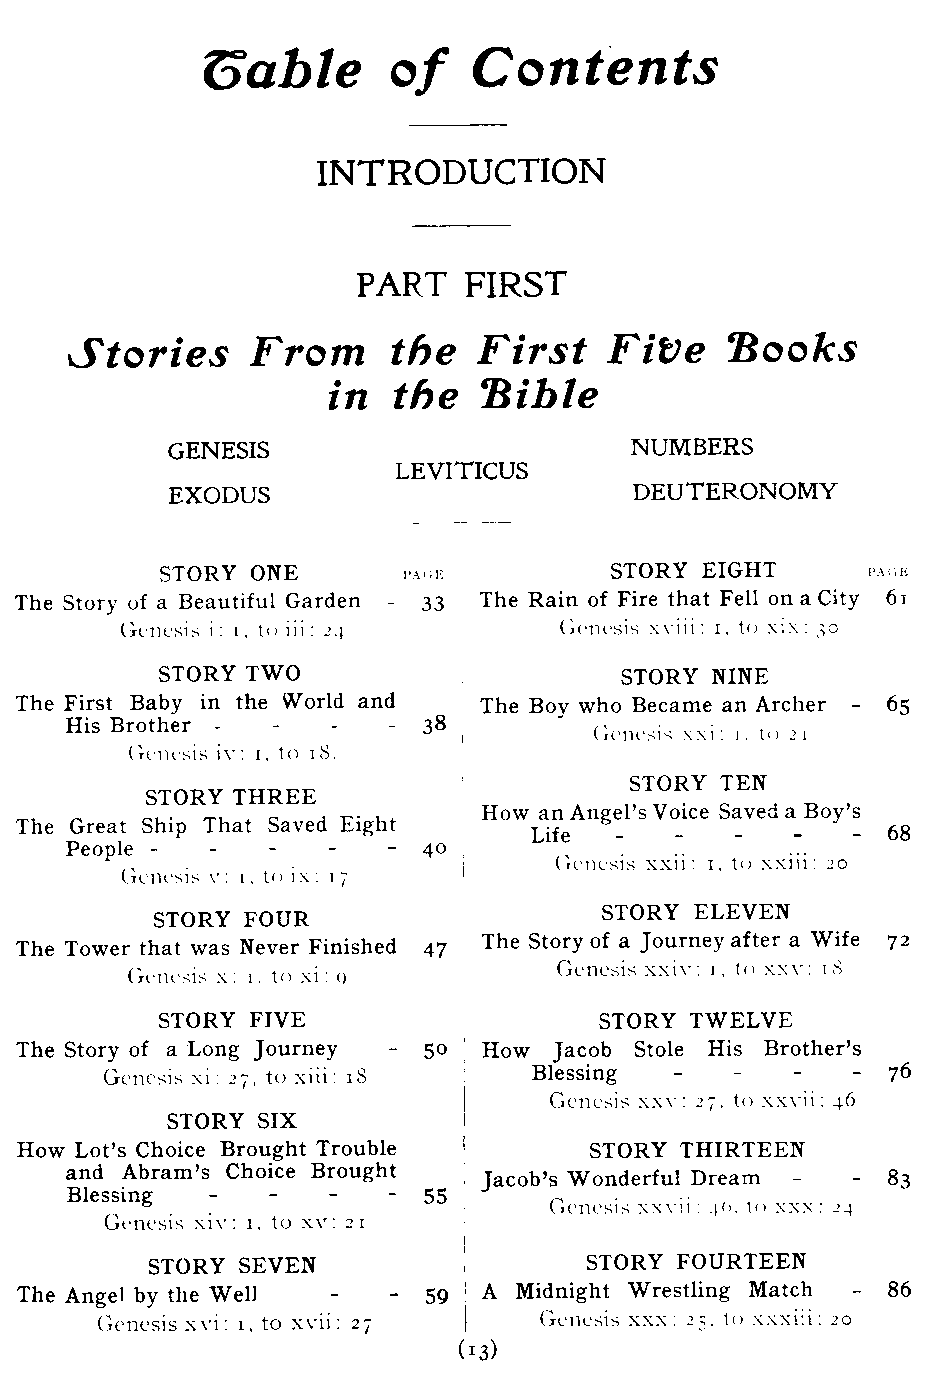 [Contents Page 1 of 10] from The Story of the Bible by Jesse Hurlbut